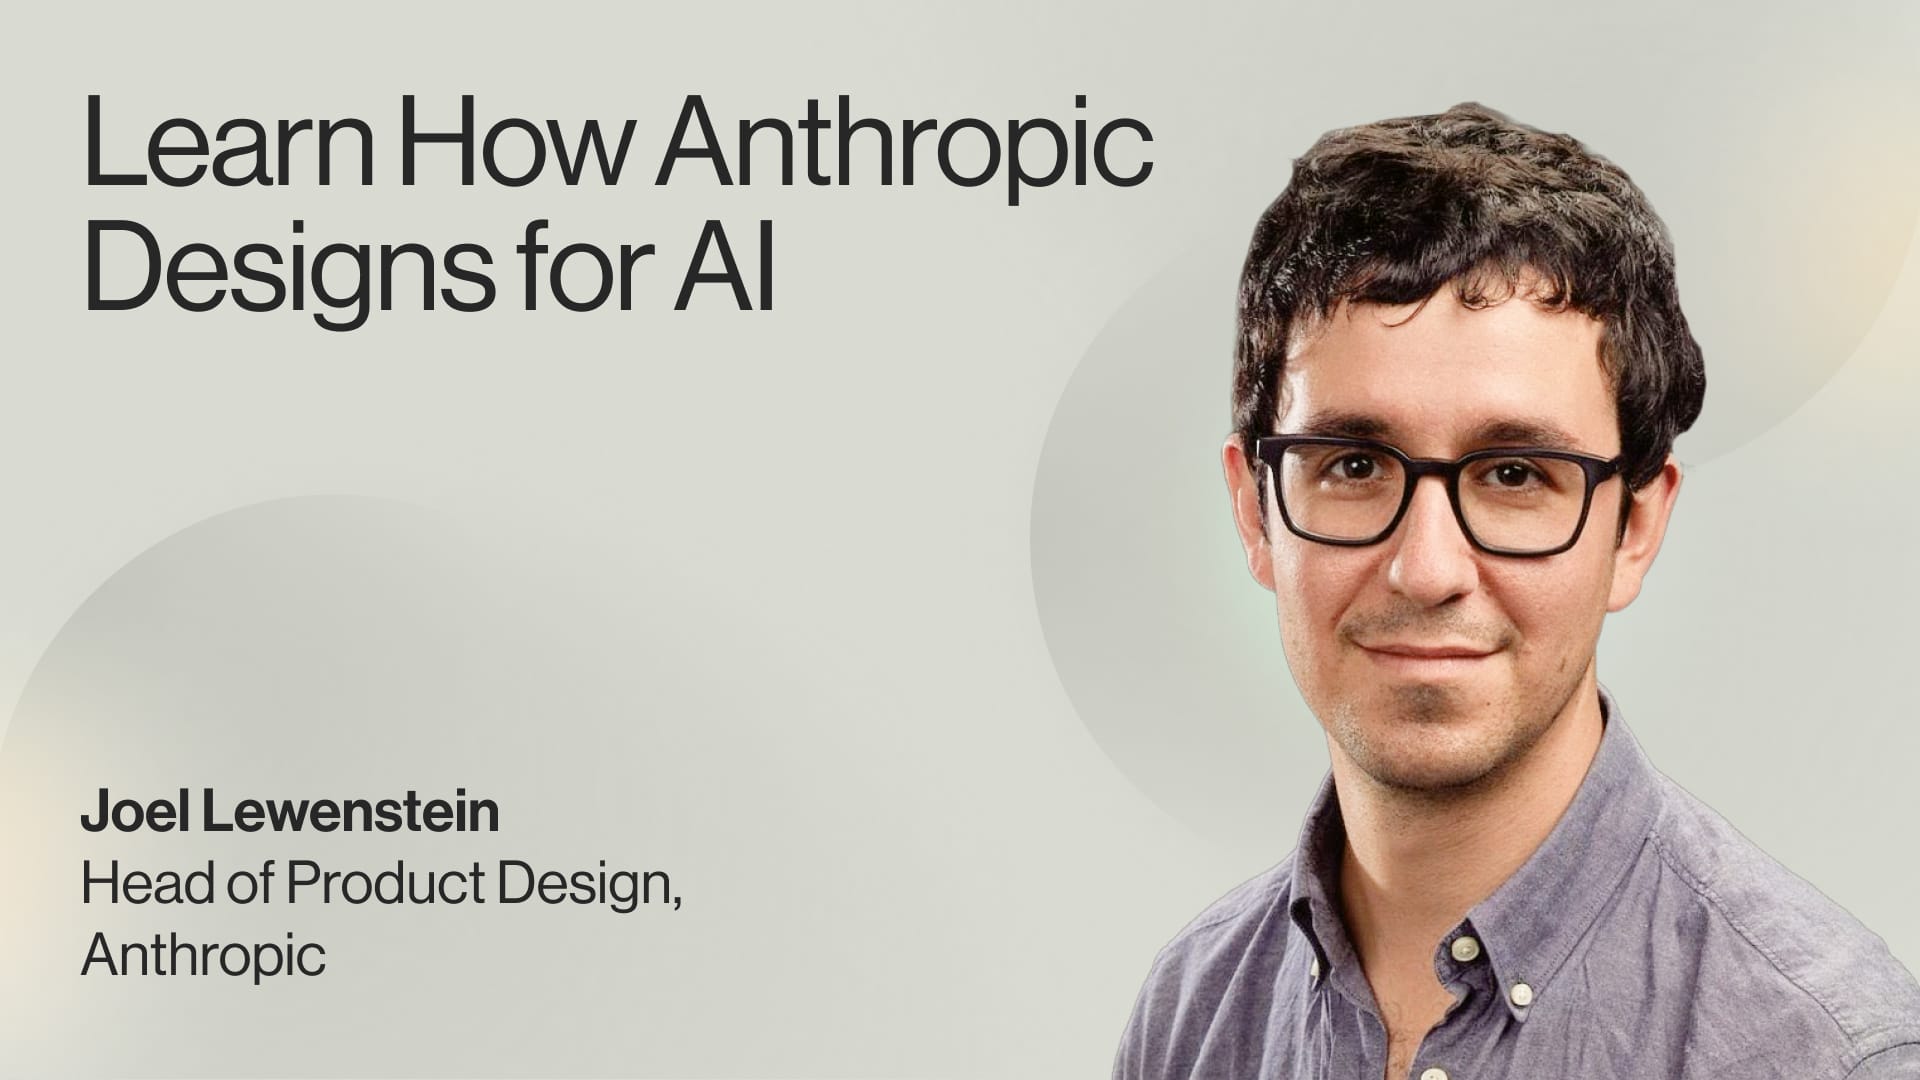 Podcast: Learn How Anthropic Designs for AI — Joel Lewenstein, Head of Product Design, Anthropic